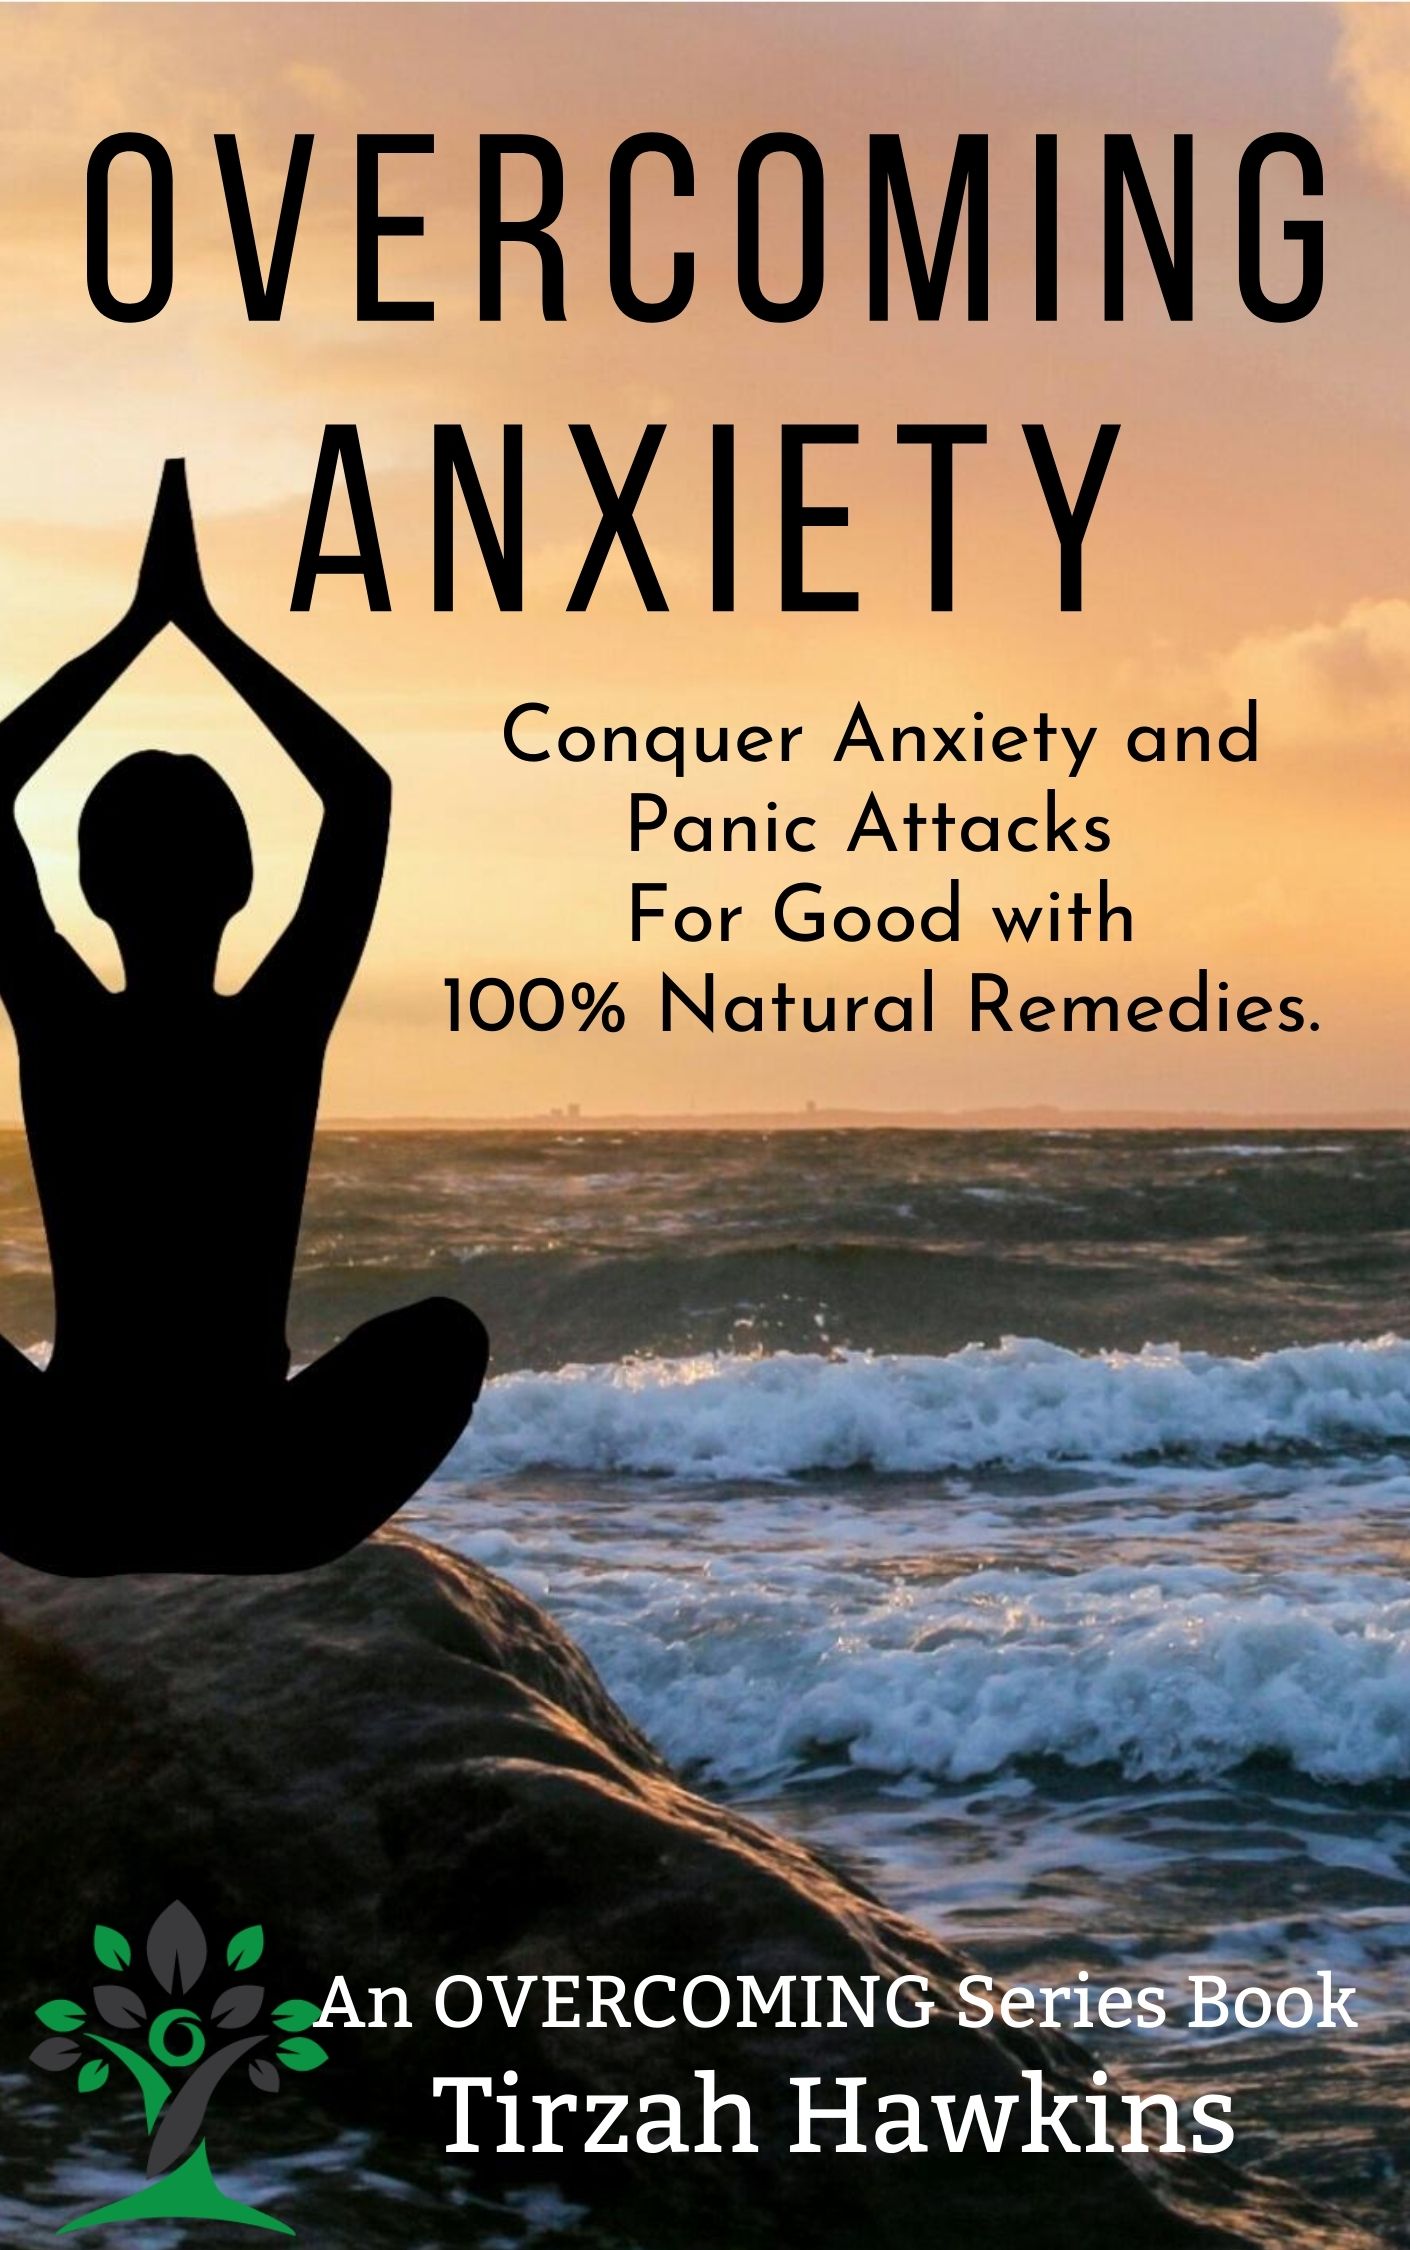 FREE: Overcoming Anxiety by Tirzah Hawkins